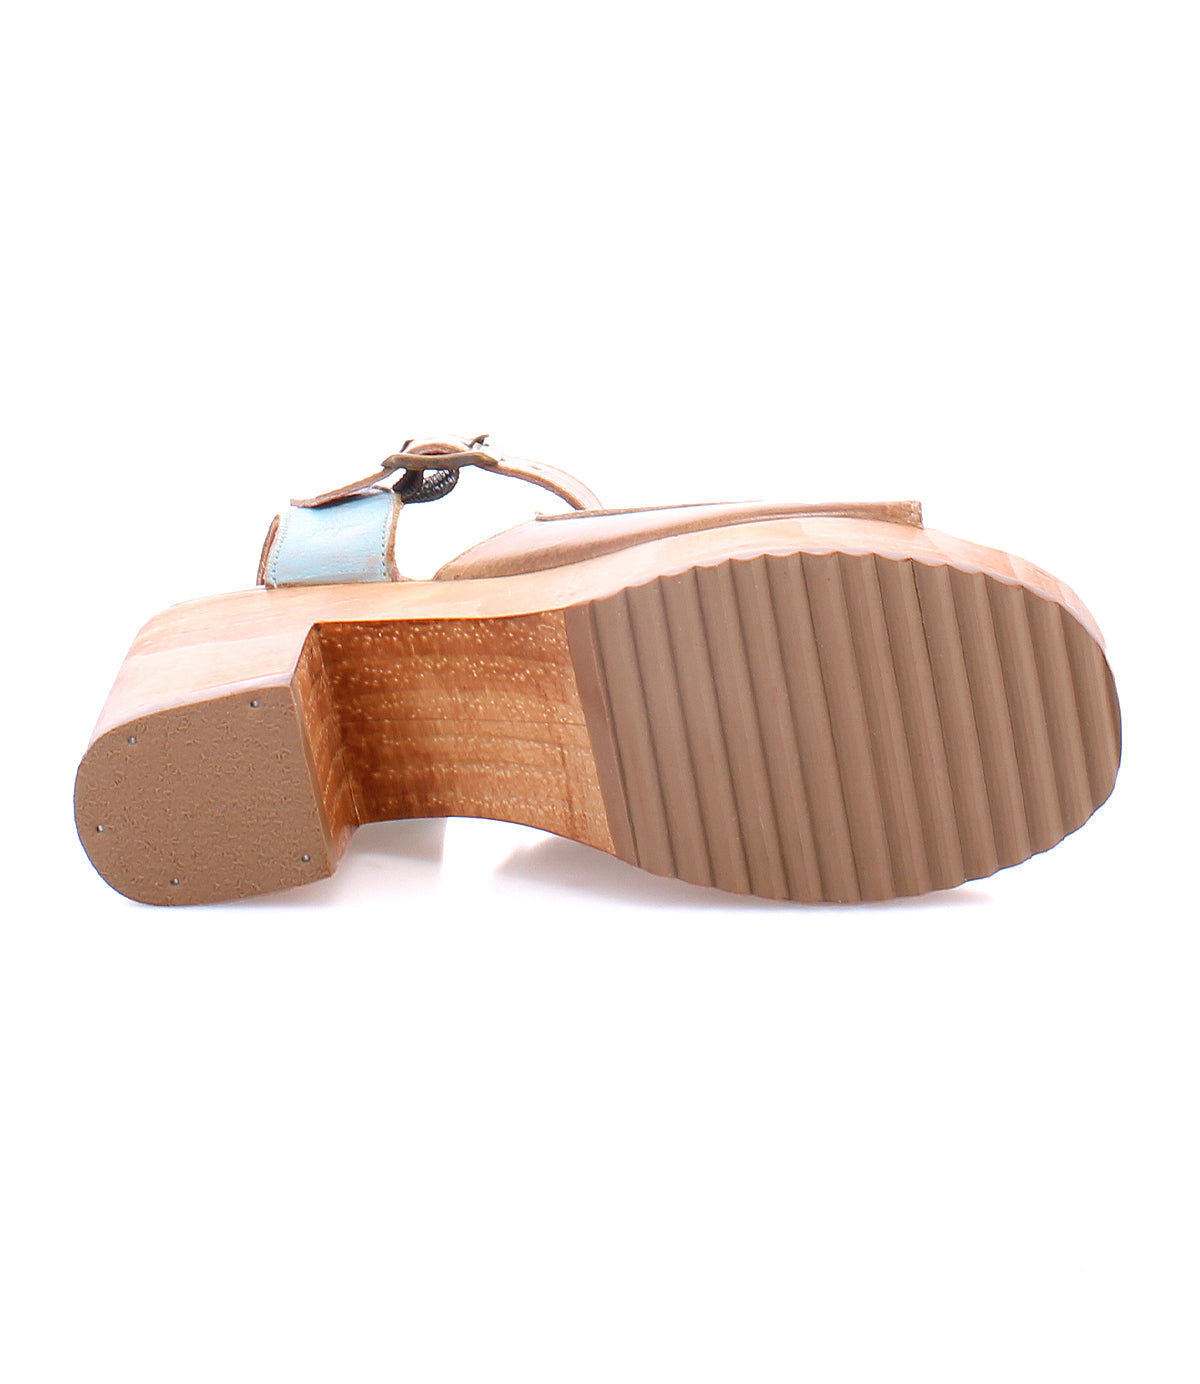 A pair of Jetsetter sandals from Bed Stu with a wooden sole and leather heels.